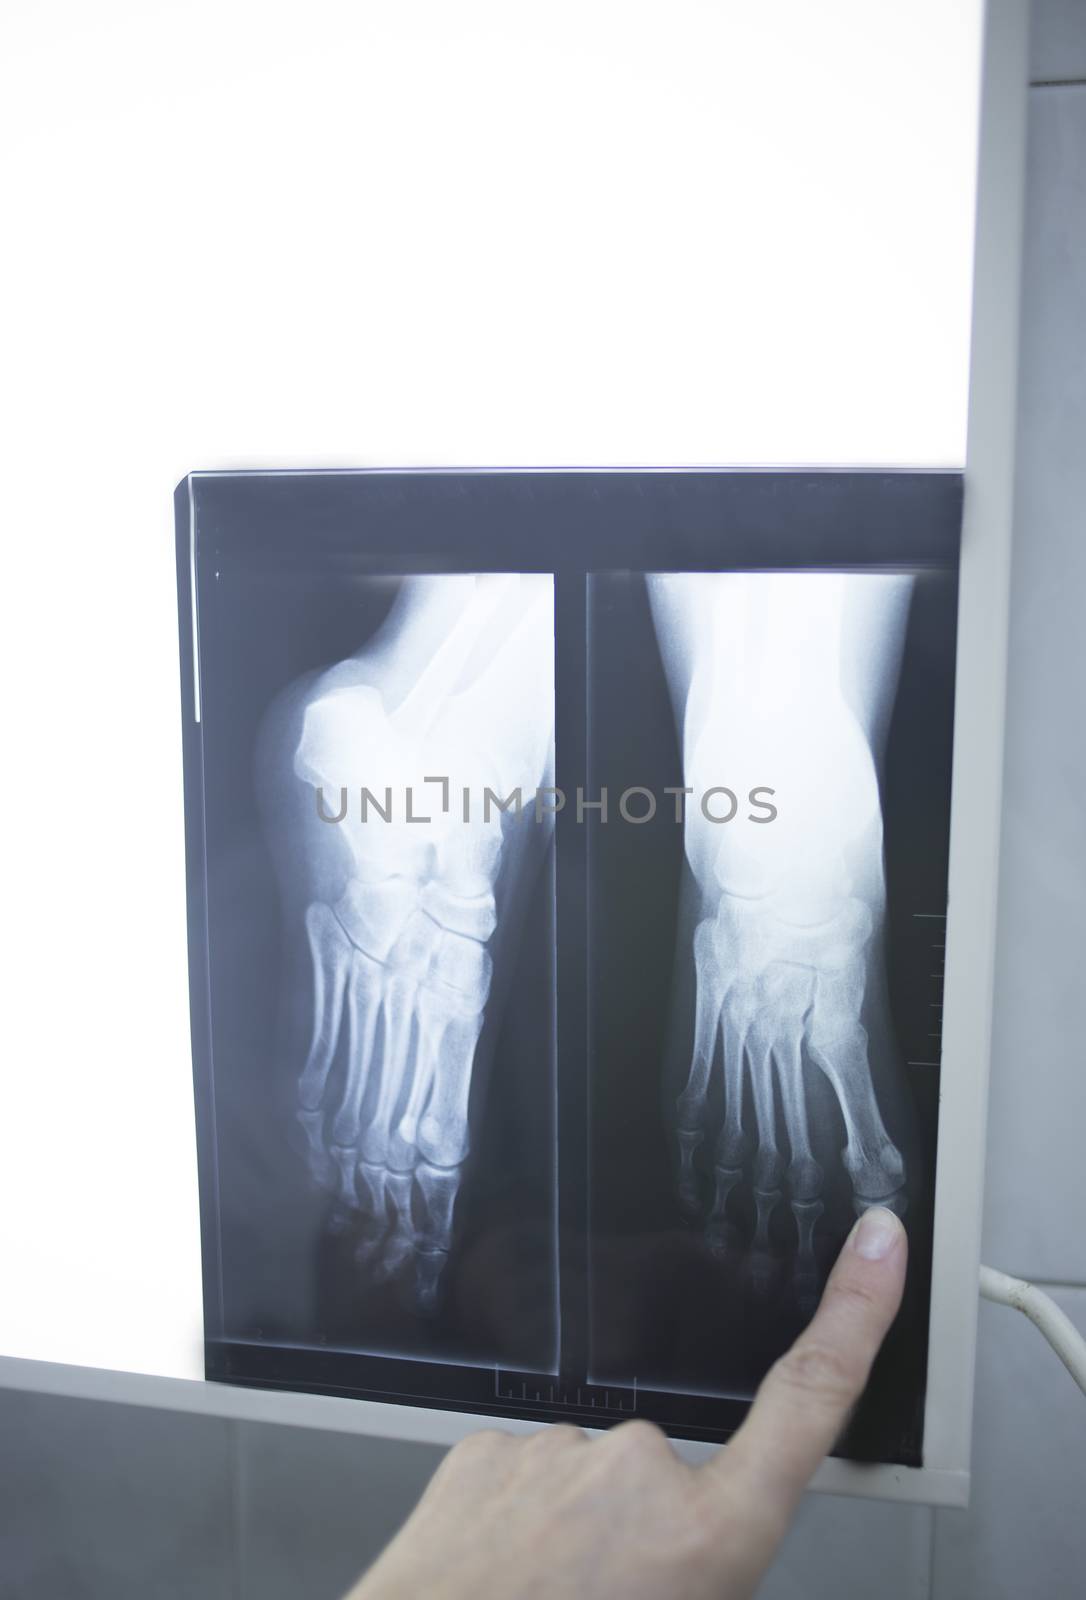 Female medical doctor pointing with finger at radiograph x-ray image on viewing light screen monitor showing hand of patient in scan.